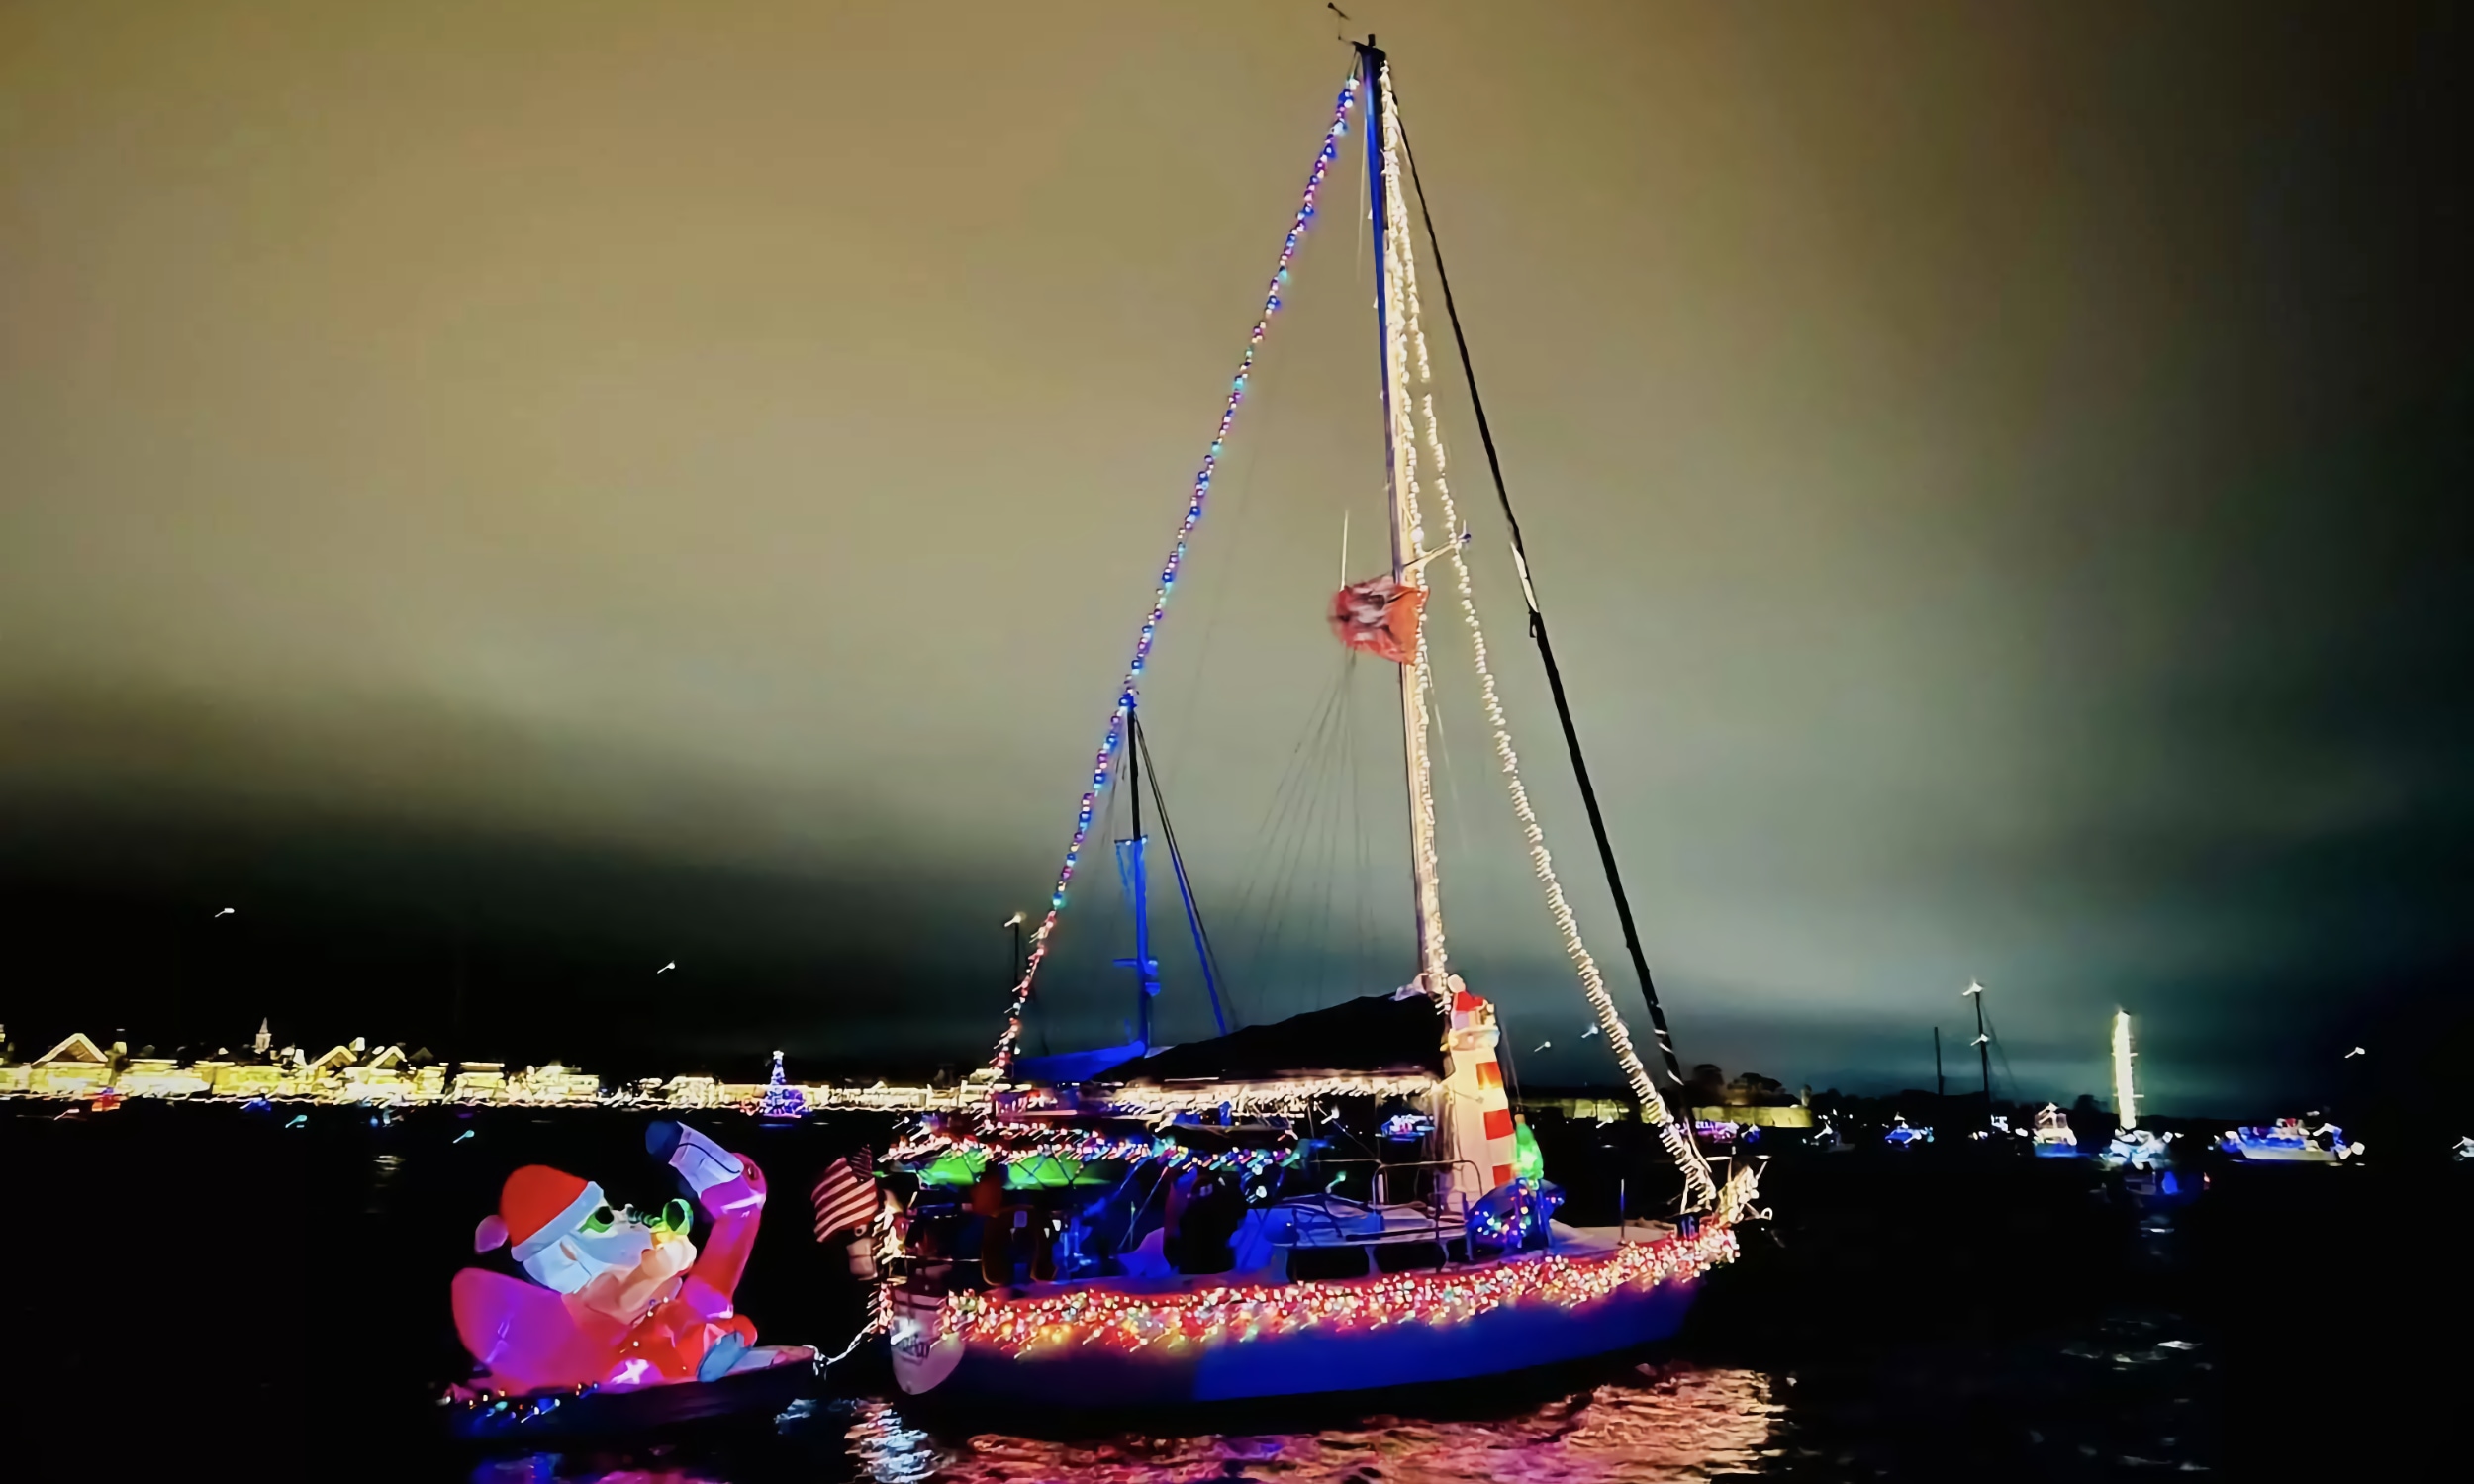 A sailobat towing Santa's Sleigh, all decorated in multi-colored lights against the St. Augustine shore for the Regatta of Lights